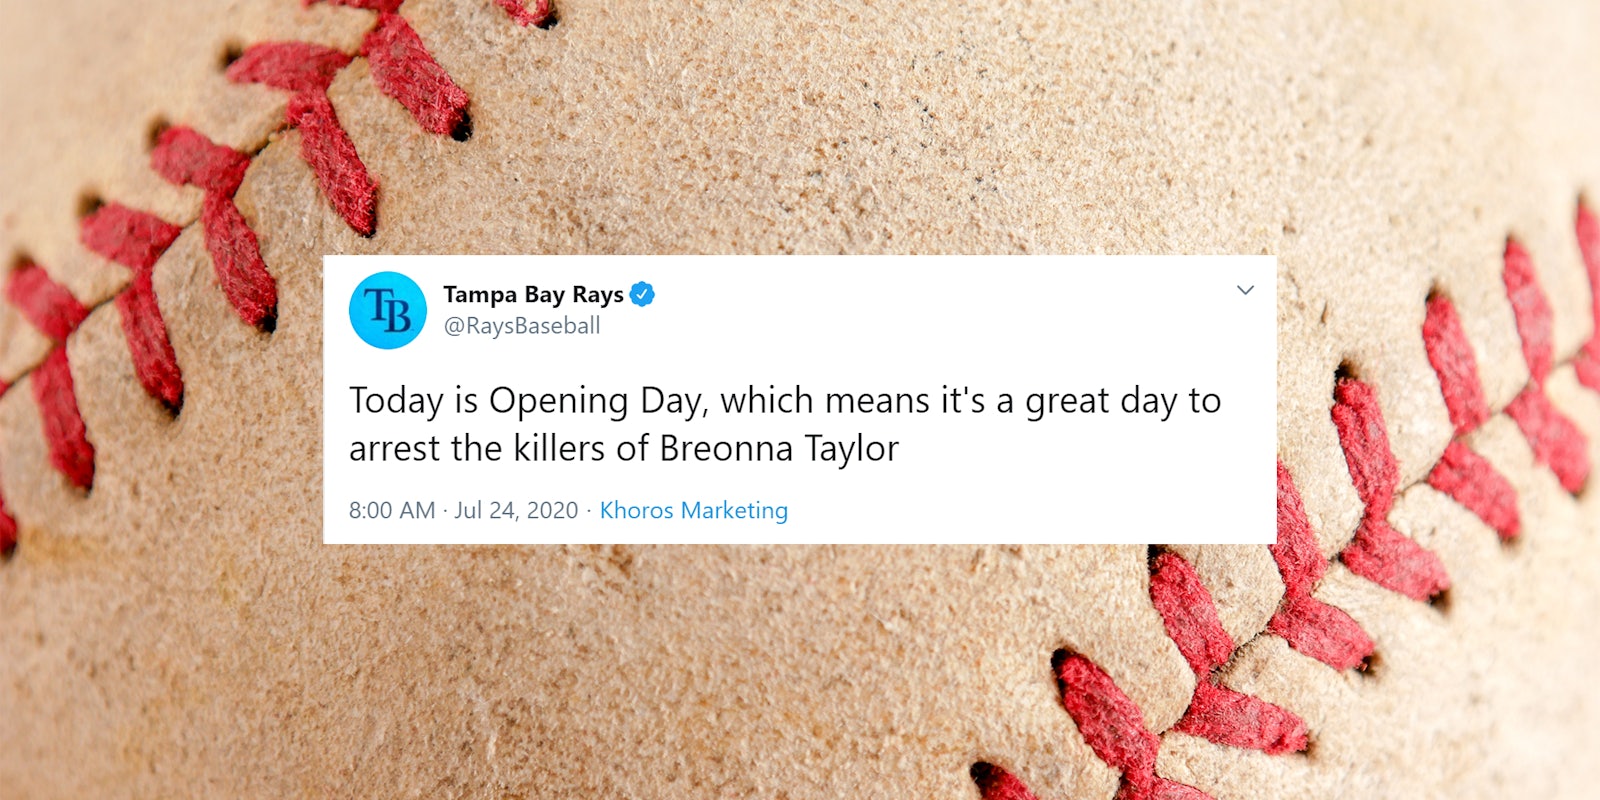 tampa bay rays tweet 'Today is Opening Day, which means it's a great day to arrest the killers of Breonna Taylor' over a baseball